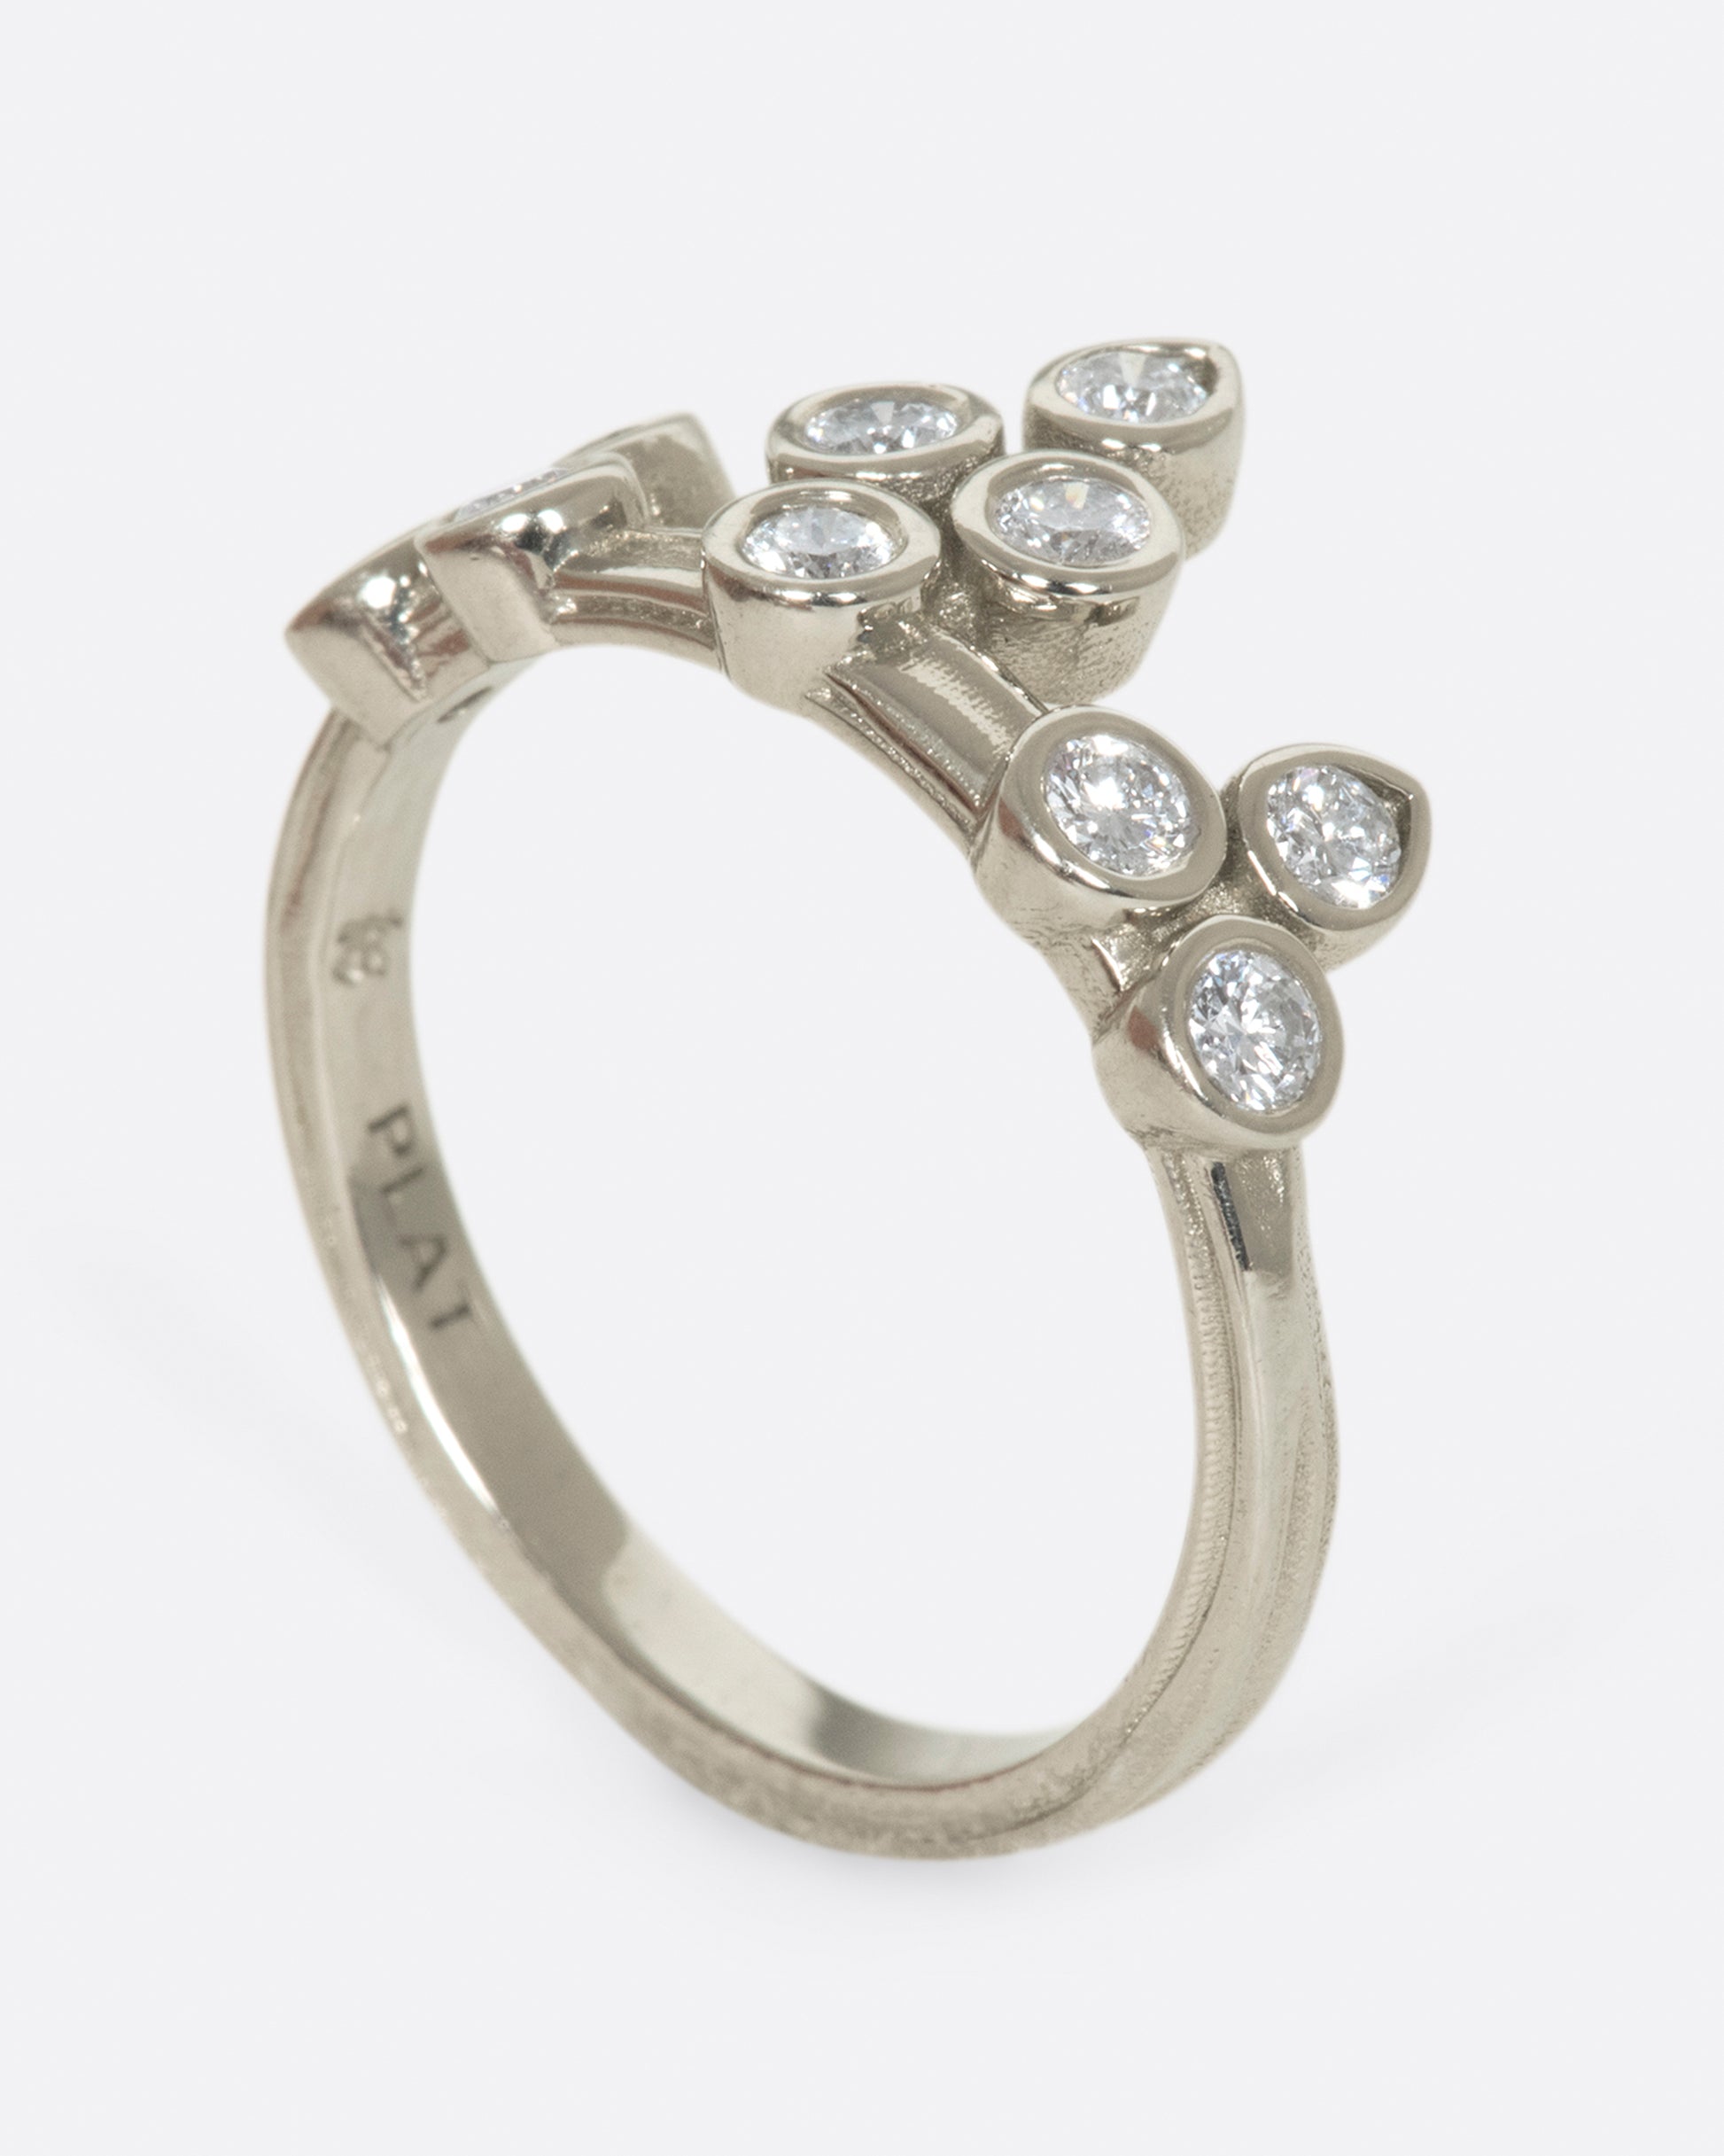 A tiara-like ring formed by 10 bezel-set round diamonds; wear it alone or stacked, and in either direction on the finger. 